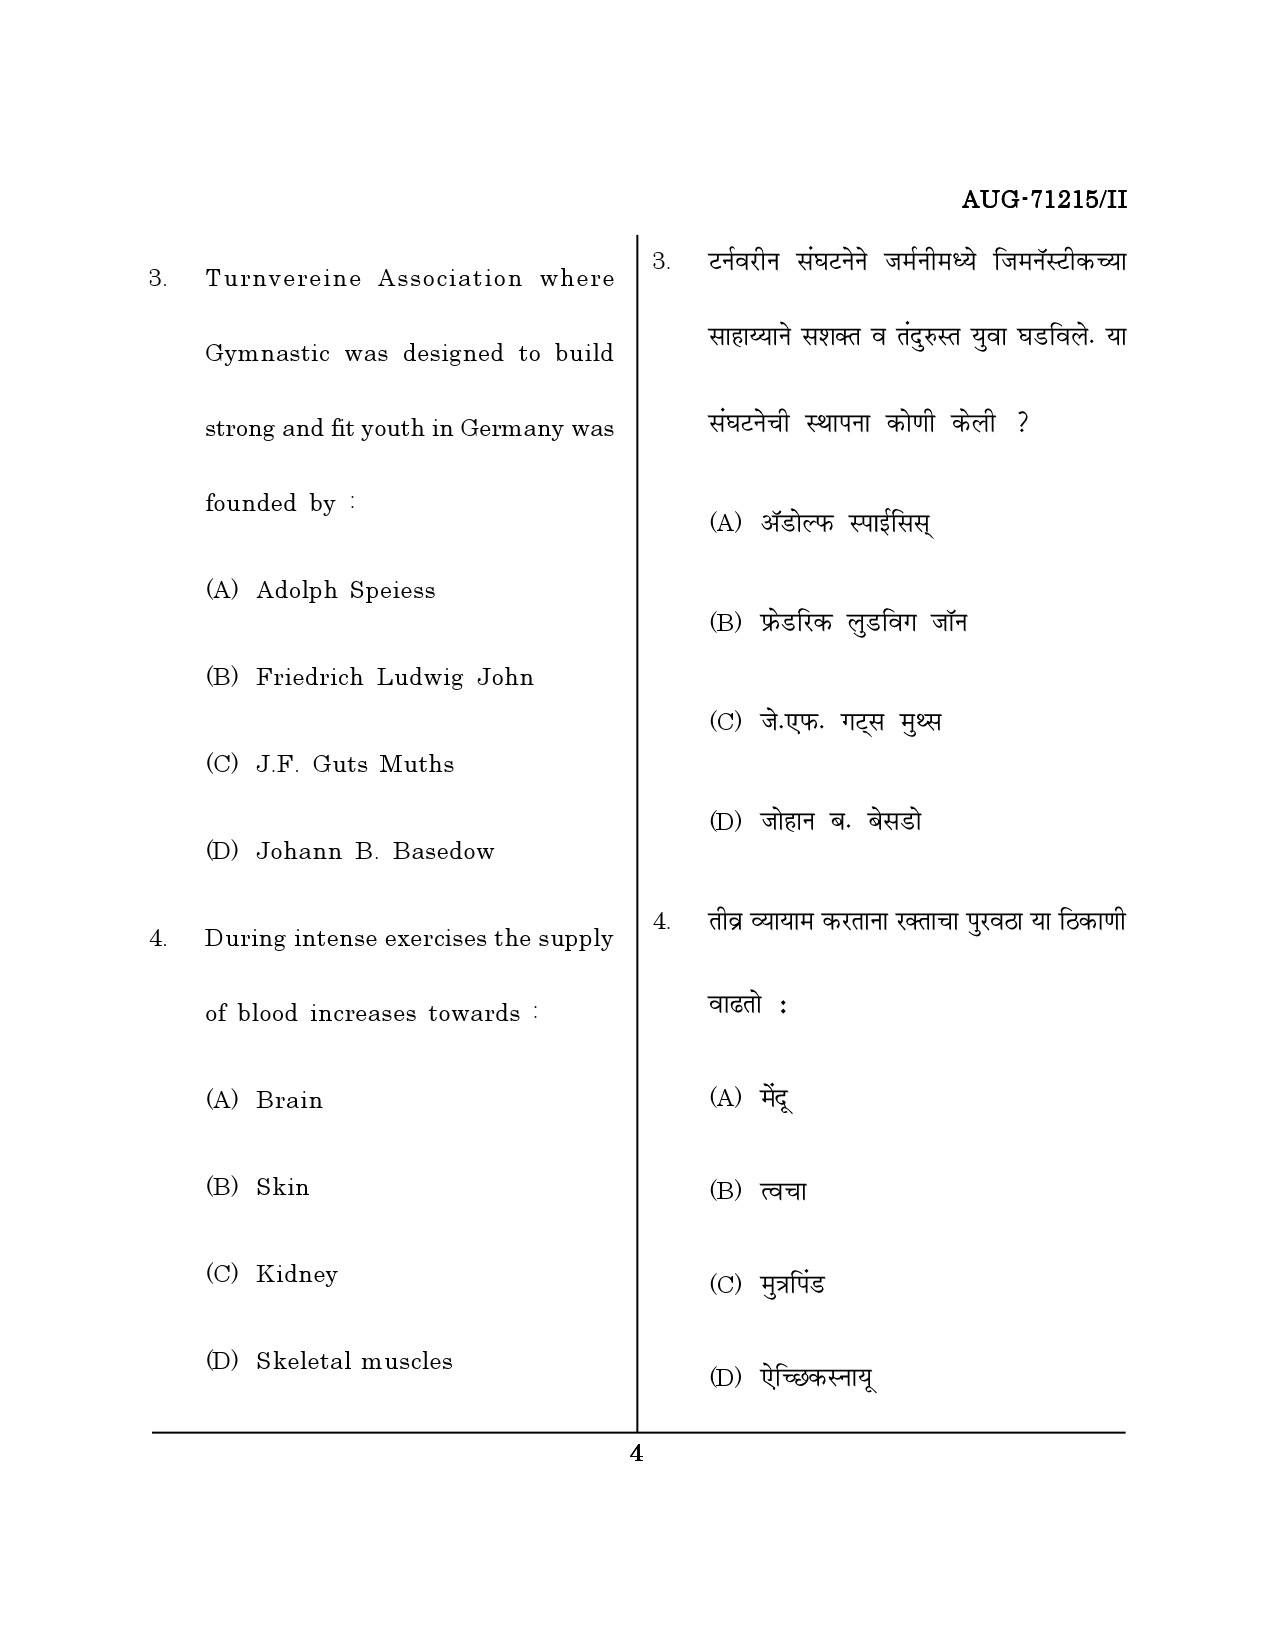 Maharashtra SET Physical Education Question Paper II August 2015 3